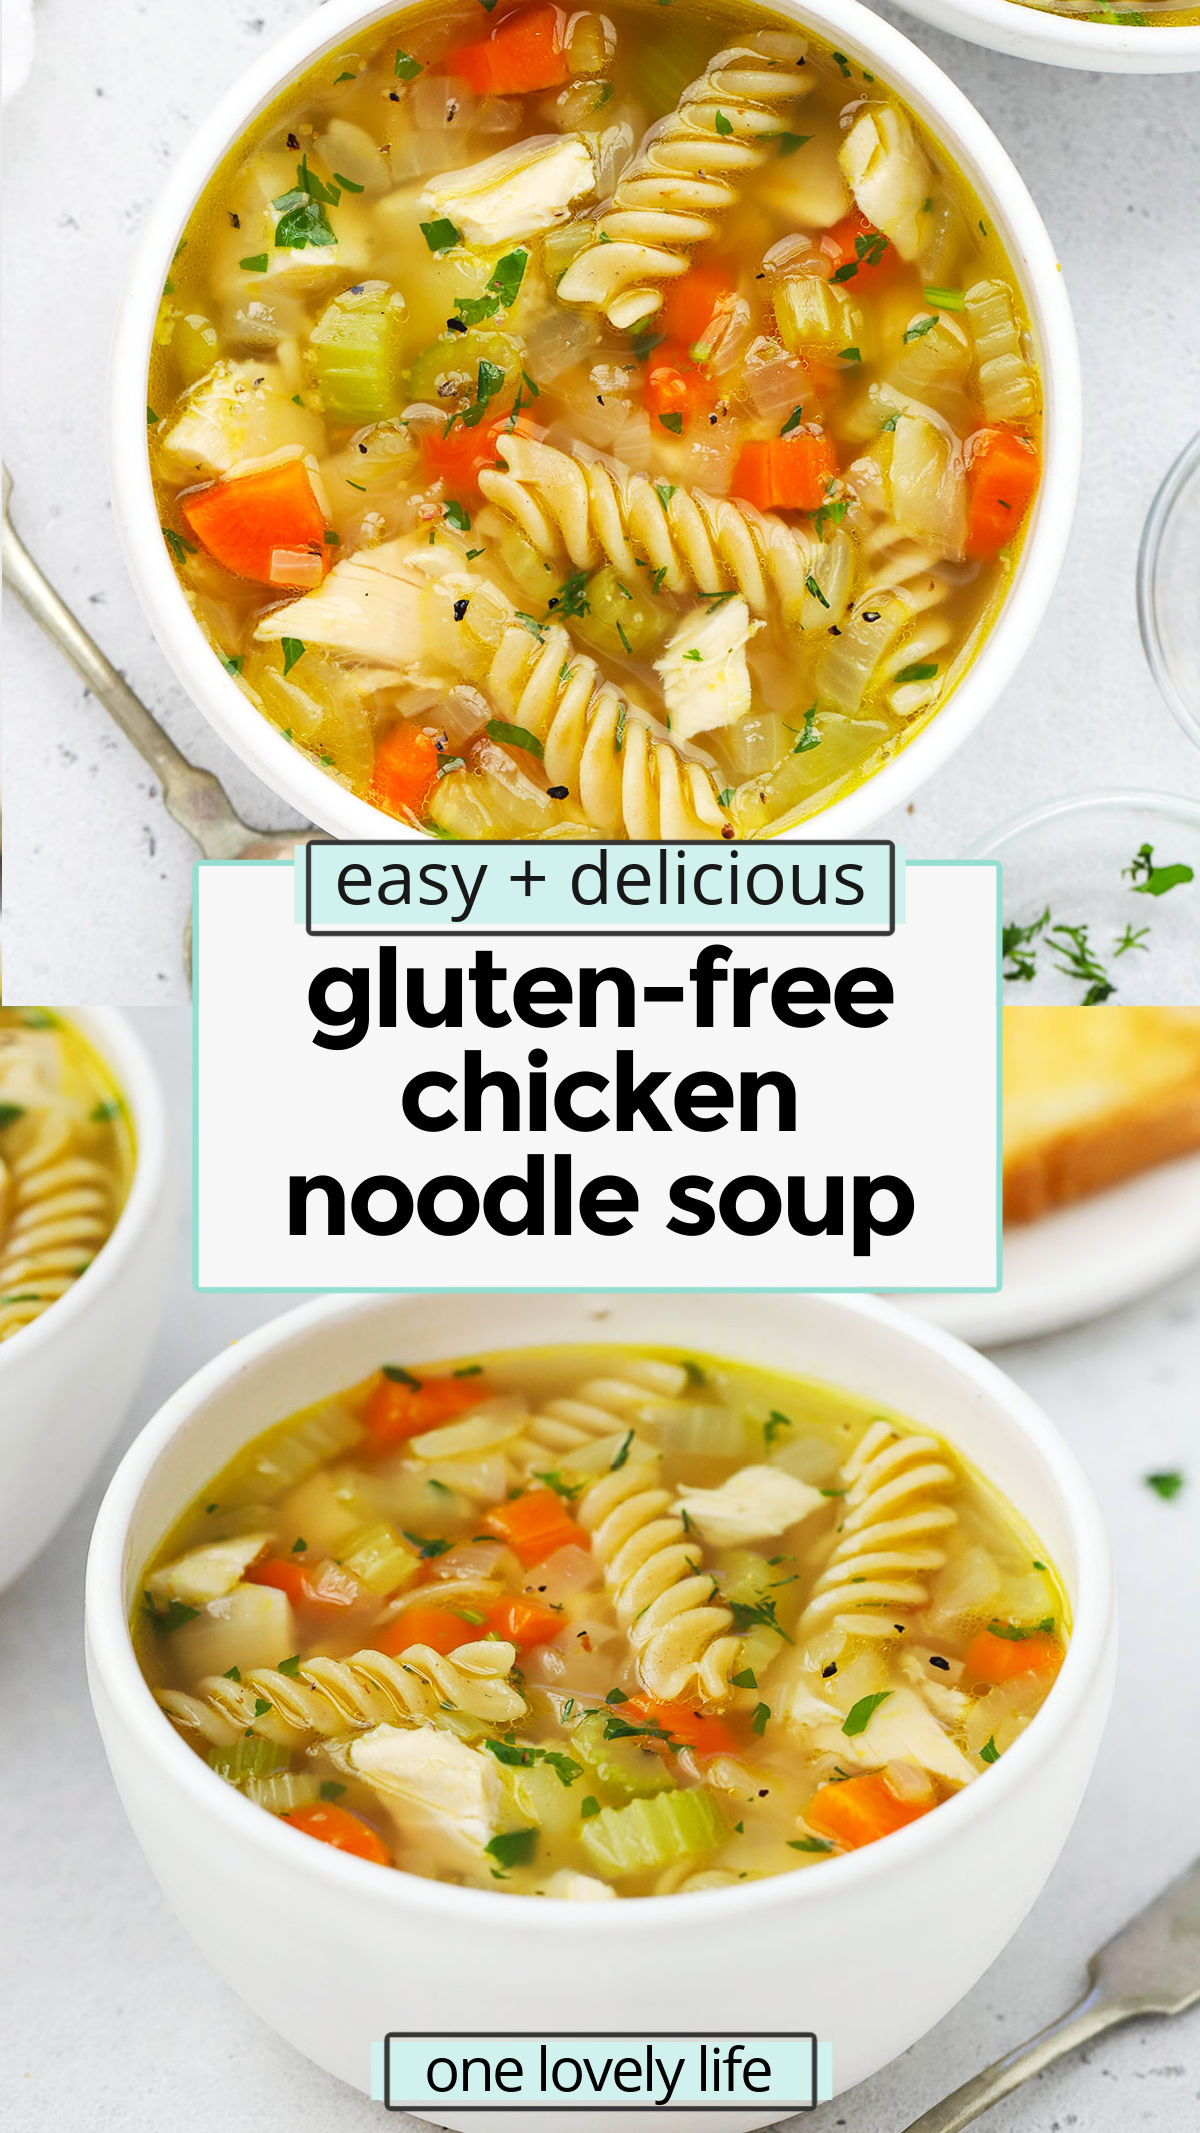 Gluten-Free Chicken Noodle Soup - This easy gluten-free chicken soup recipe is full of flavor, made from simple ingredients & tastes so cozy! (Dairy-free) // gluten-free chicken noodle soup recipe / the best gluten-free chicken noodle soup recipe / gluten-free soup recipe / gluten-free noodle soup recipe / healthy chicken noodle soup / homemade chicken noodle soup / homemade gluten-free chicken noodle soup from scratch